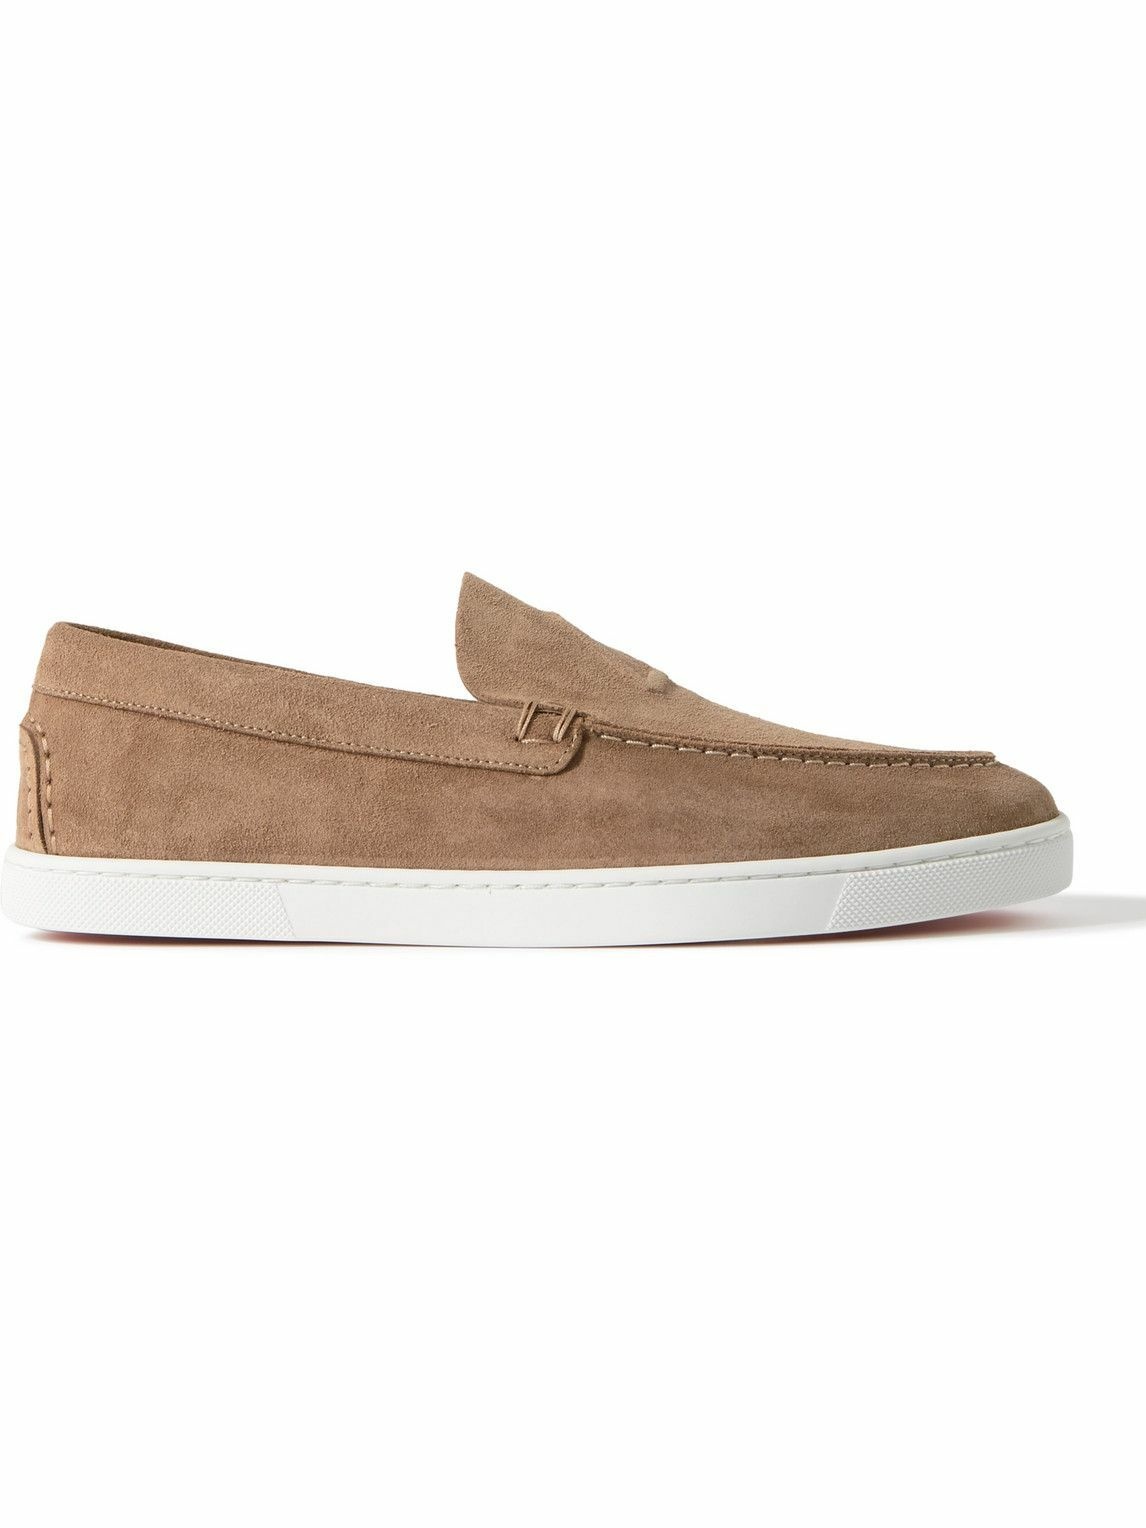 Christian Louboutin - Varsiboat Logo-Embossed Suede Loafers - Brown ...